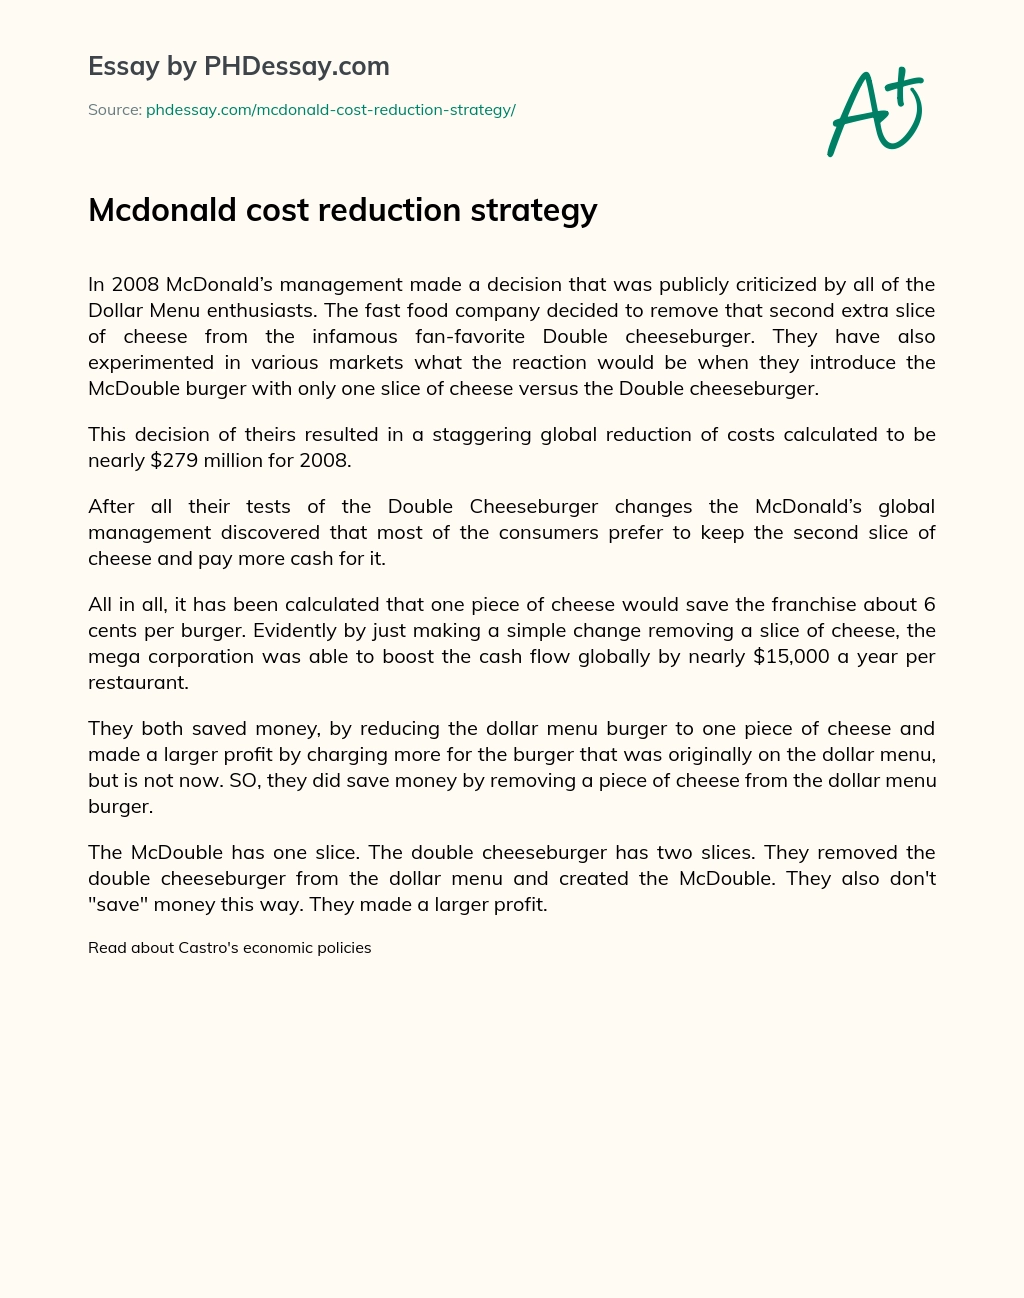 Mcdonald cost reduction strategy essay